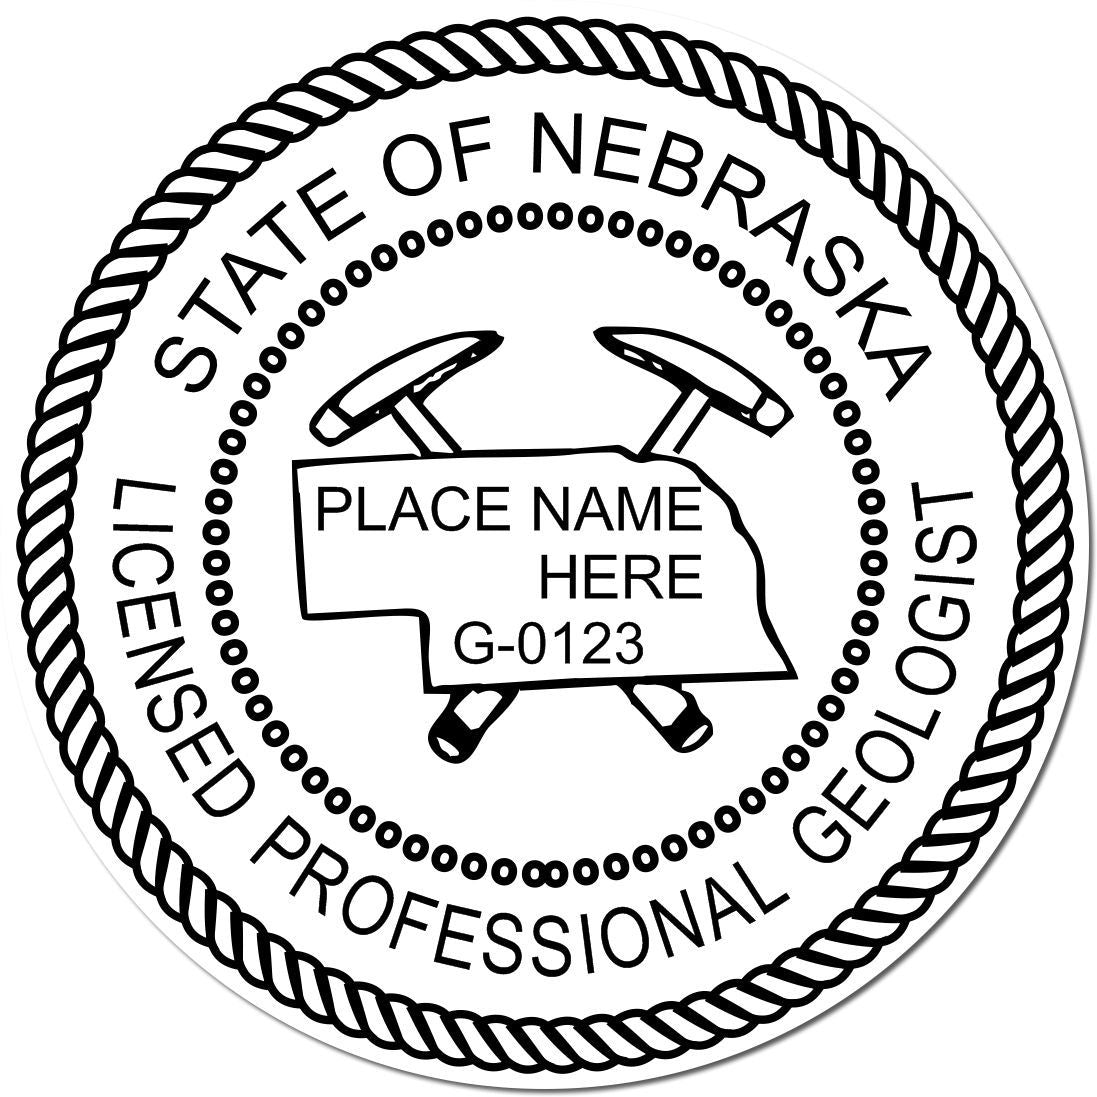 This paper is stamped with a sample imprint of the Slim Pre-Inked Nebraska Professional Geologist Seal Stamp, signifying its quality and reliability.